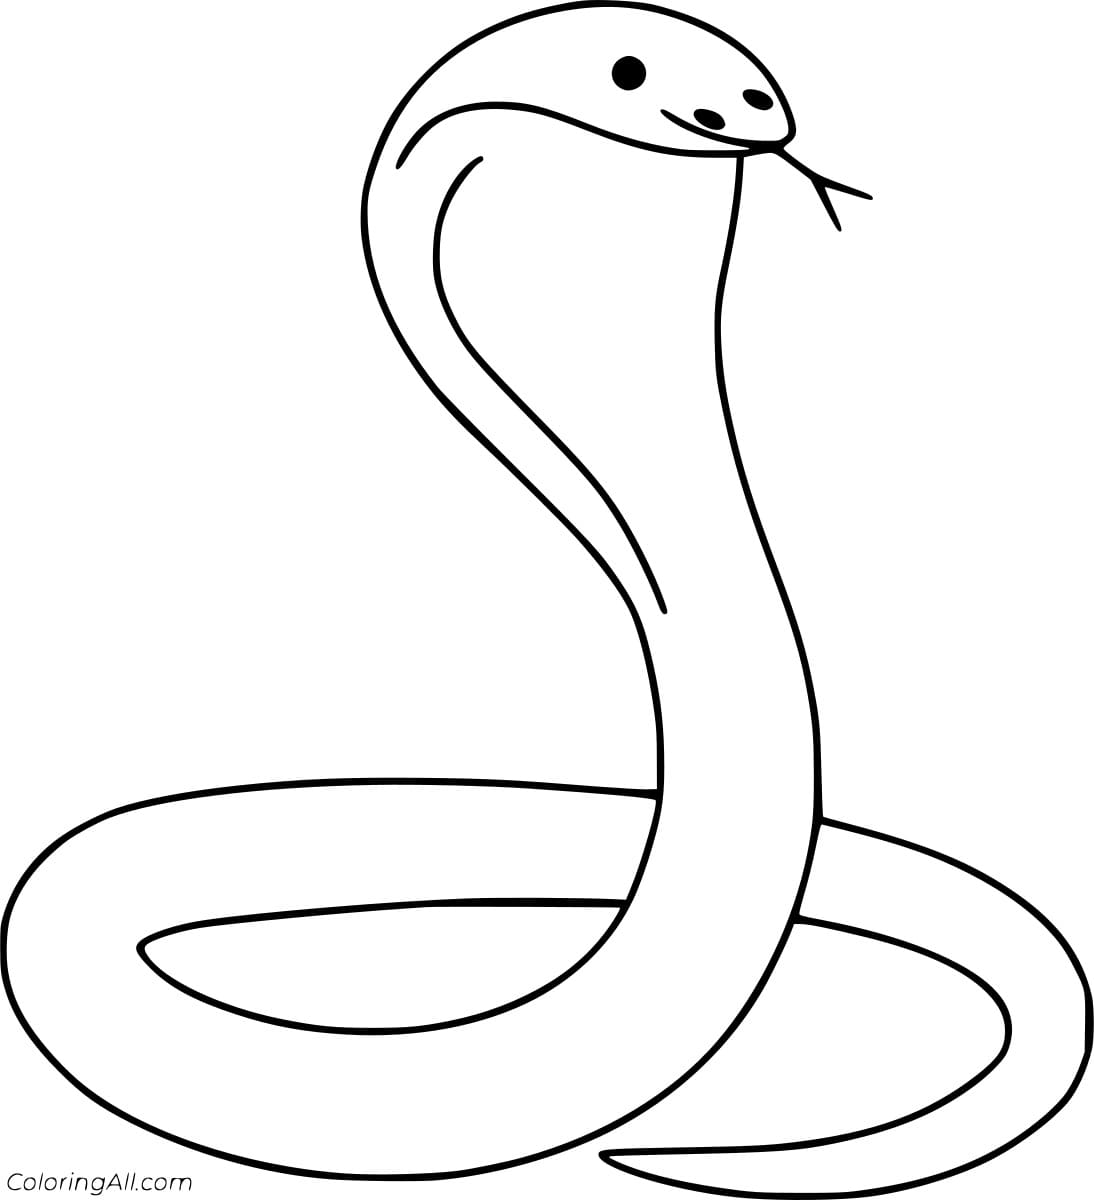 Cobra Outline Free Printable Coloring Page